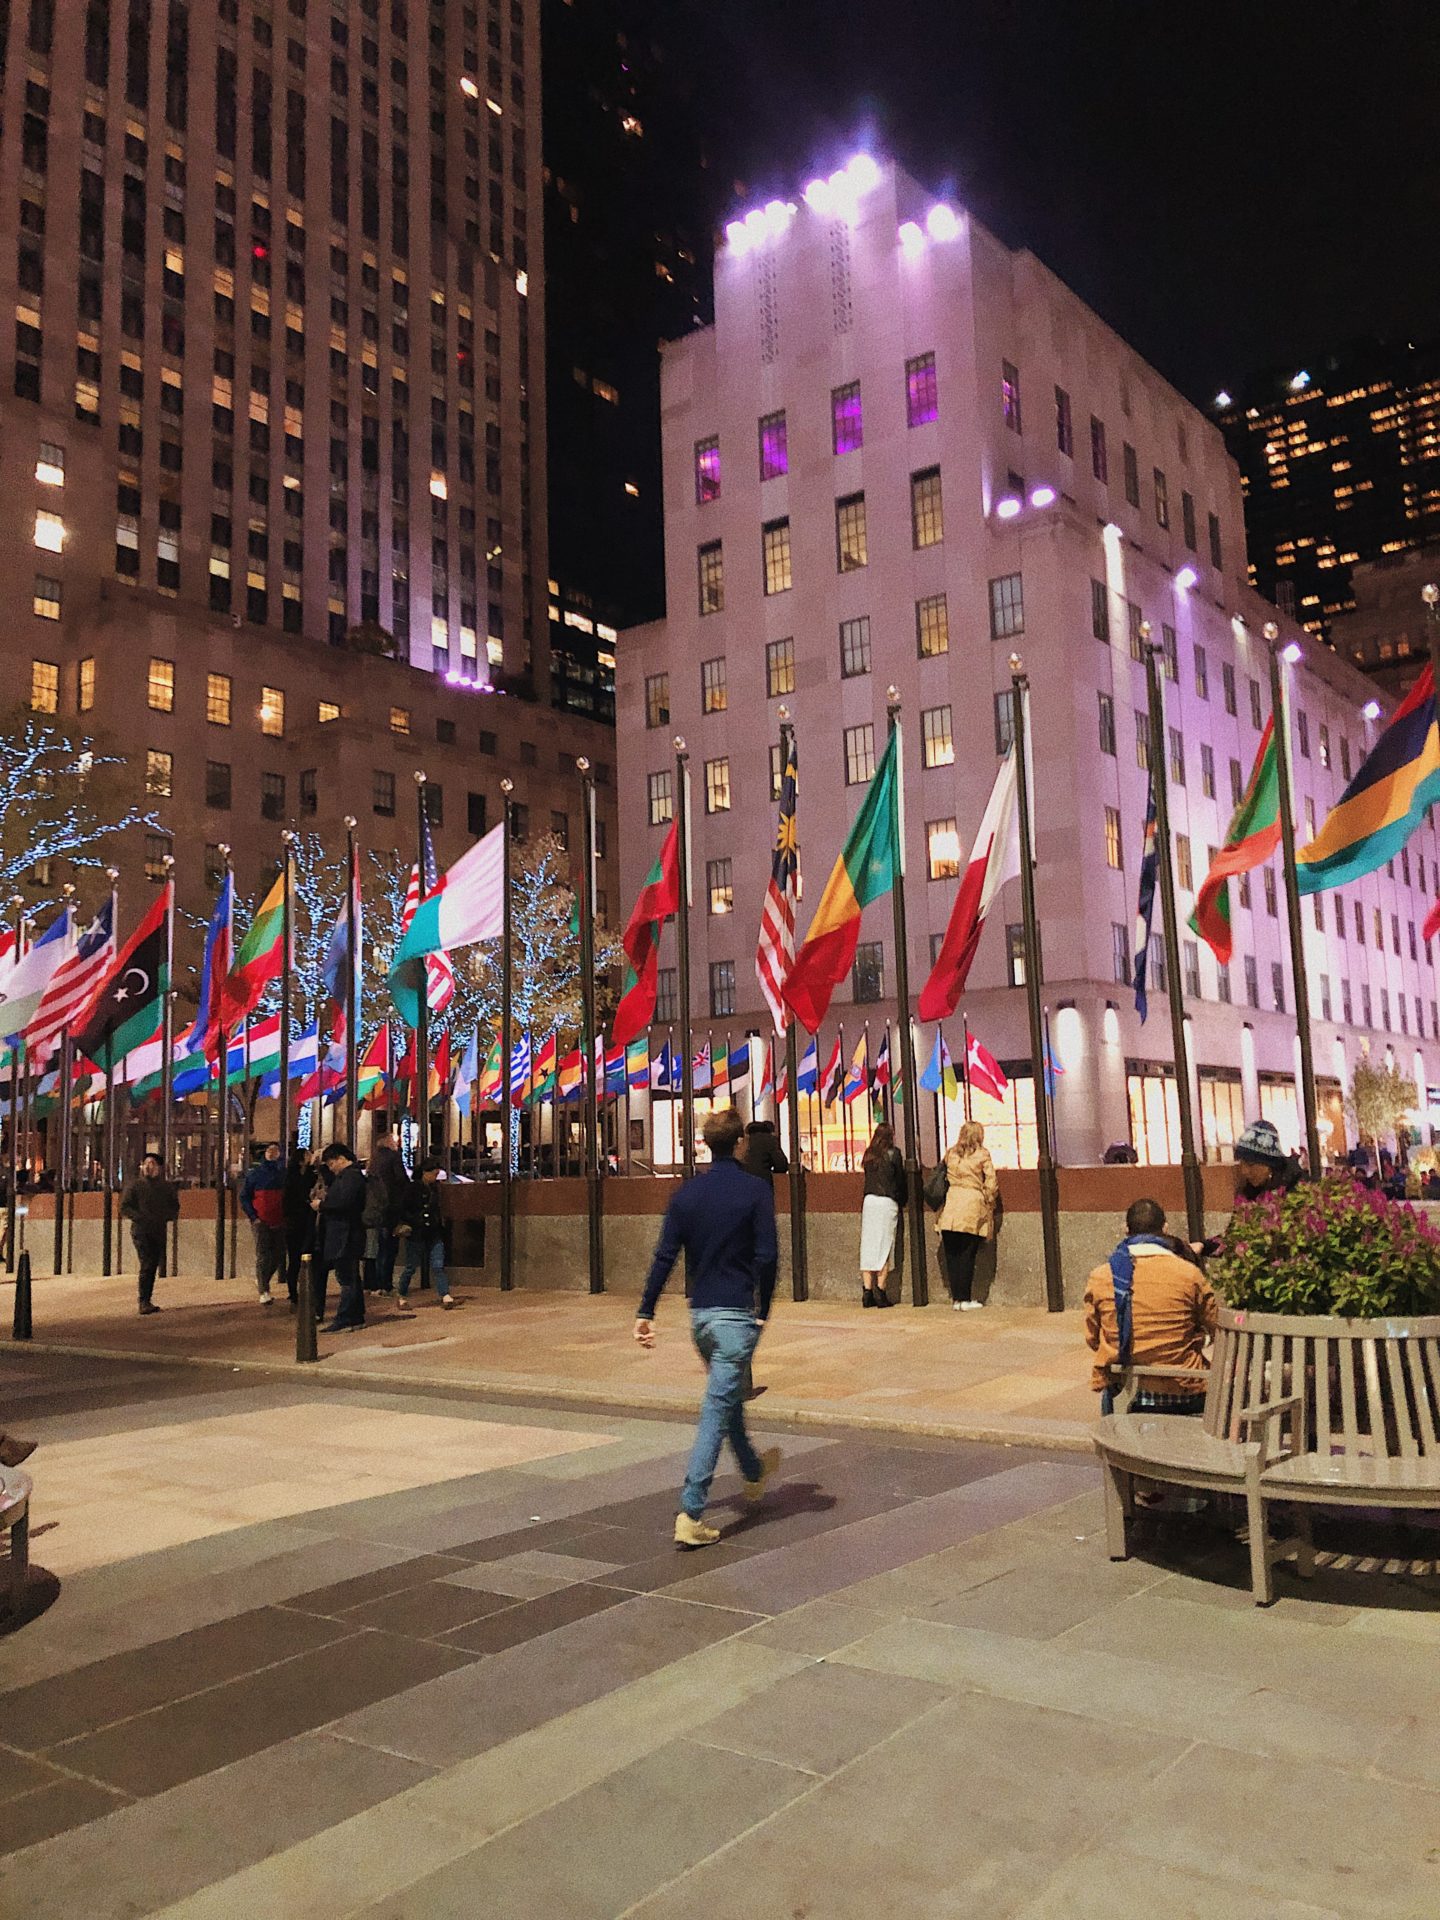 The flags at Rockefeller Centre in New York City